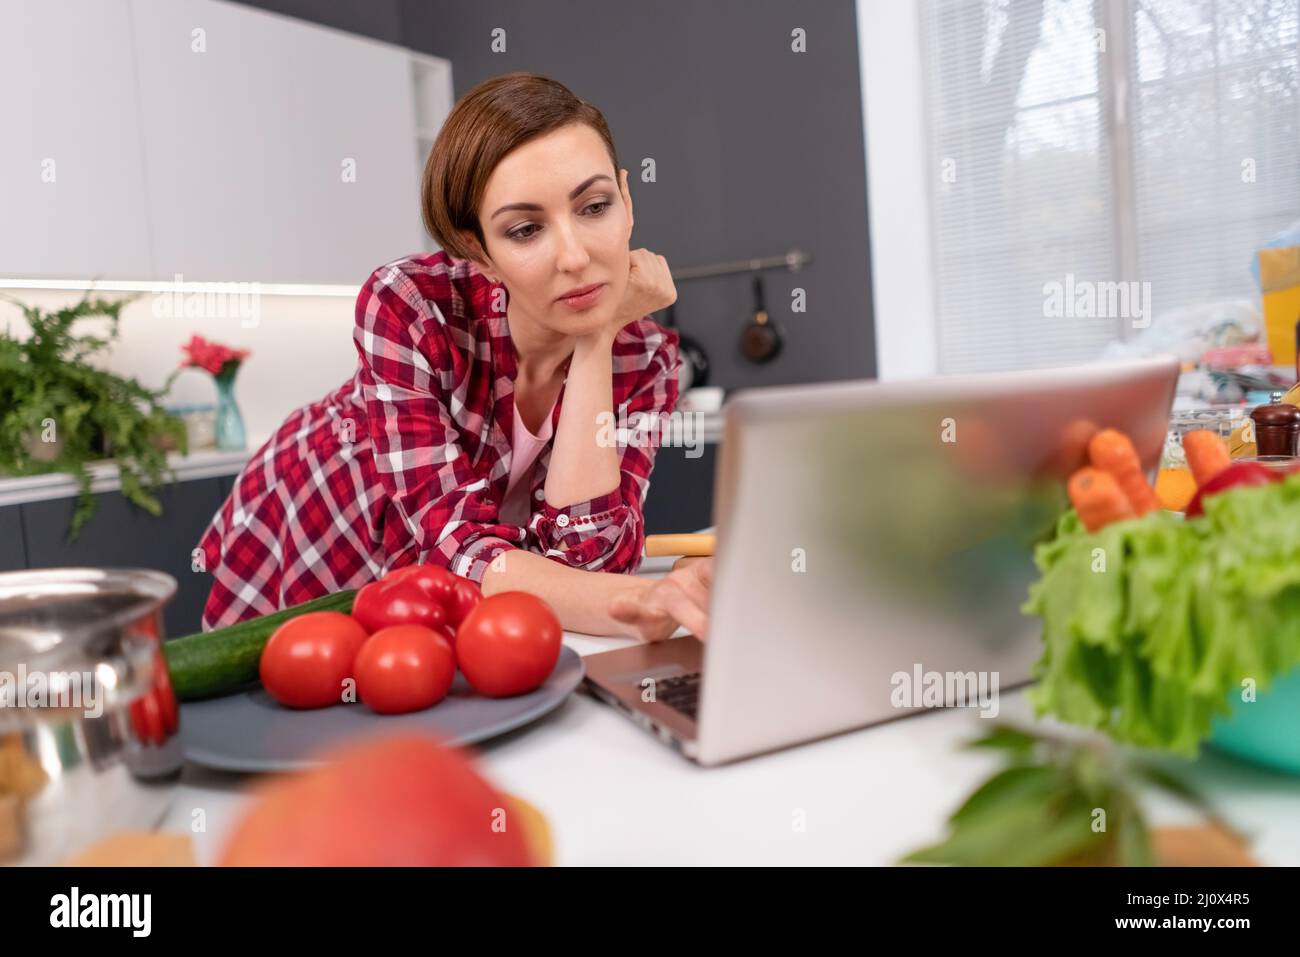 Short haired woman use laptop having video call near fresh vegetables in kitchen. Bored or interested woman uses laptop. Young w Stock Photo